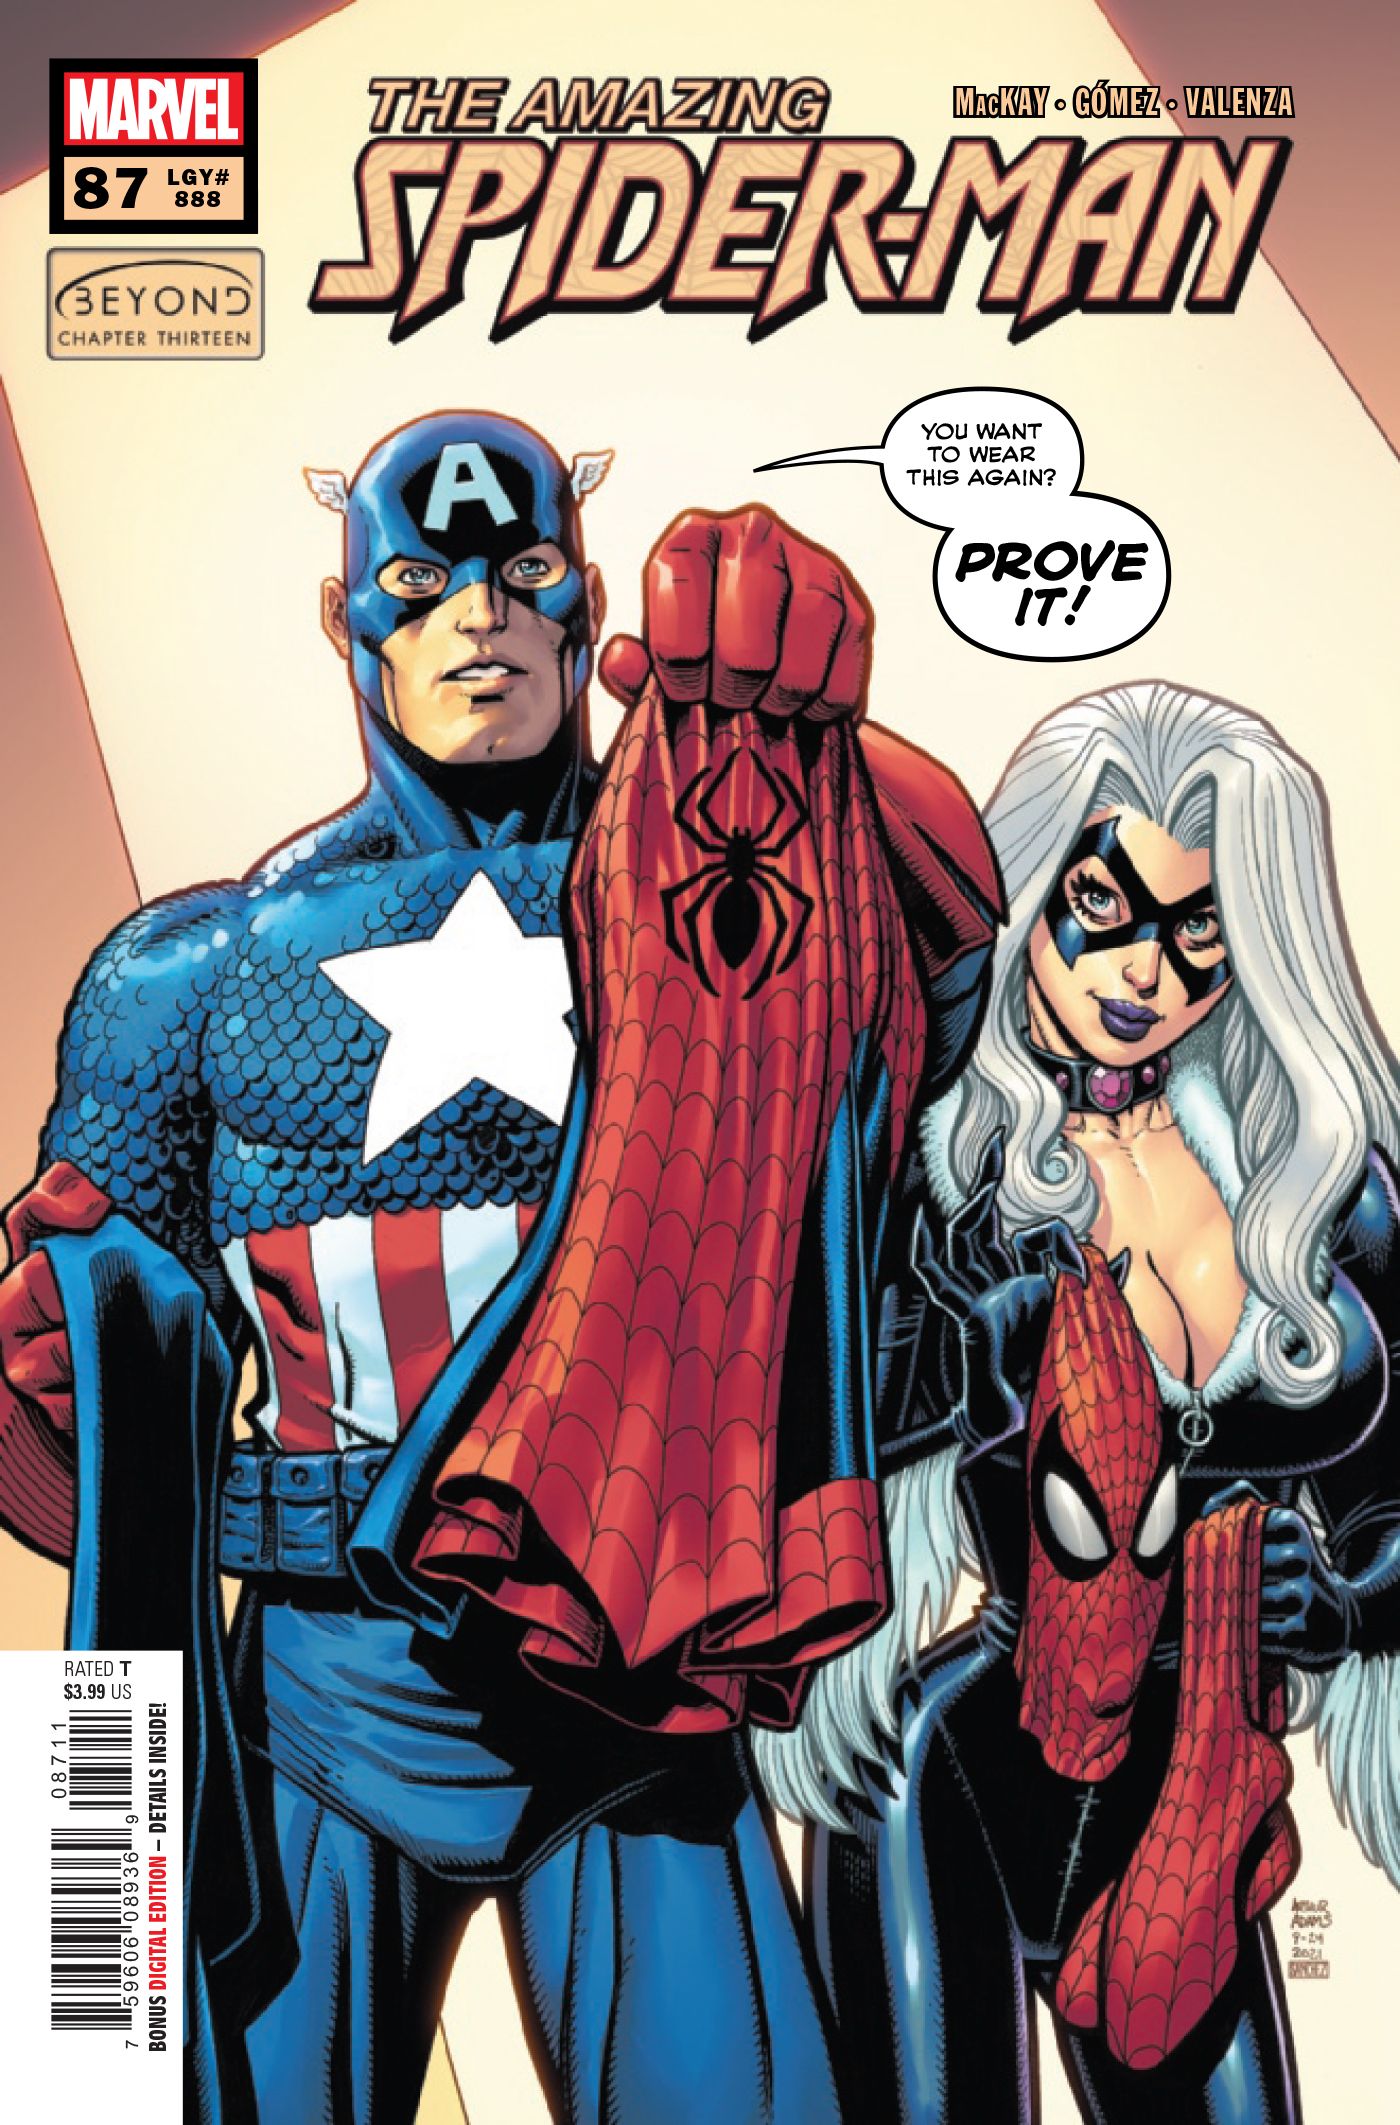 Black Cat and Captain America stand side-by-side holding Spider-Man's costume.